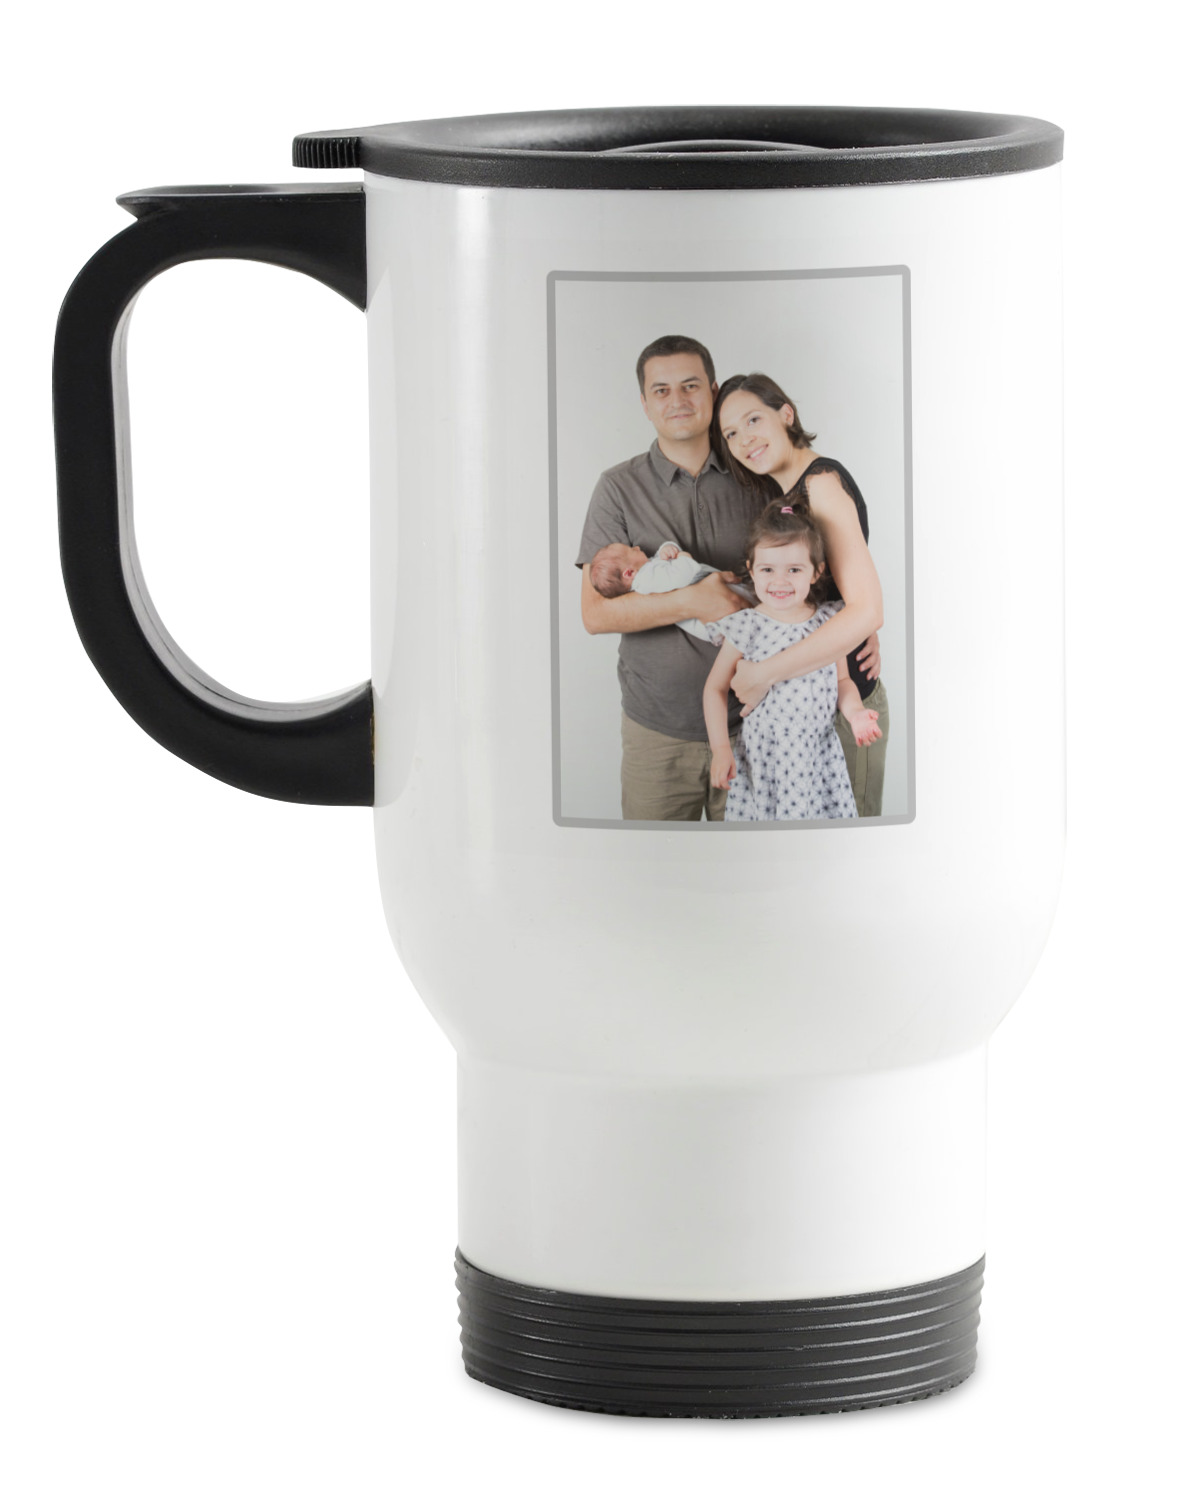 https://www.youcustomizeit.com/common/MAKE/6059717/Family-Photo-and-Name-Stainless-Steel-Travel-Mug-with-Handle-Front.jpg?lm=1686251563